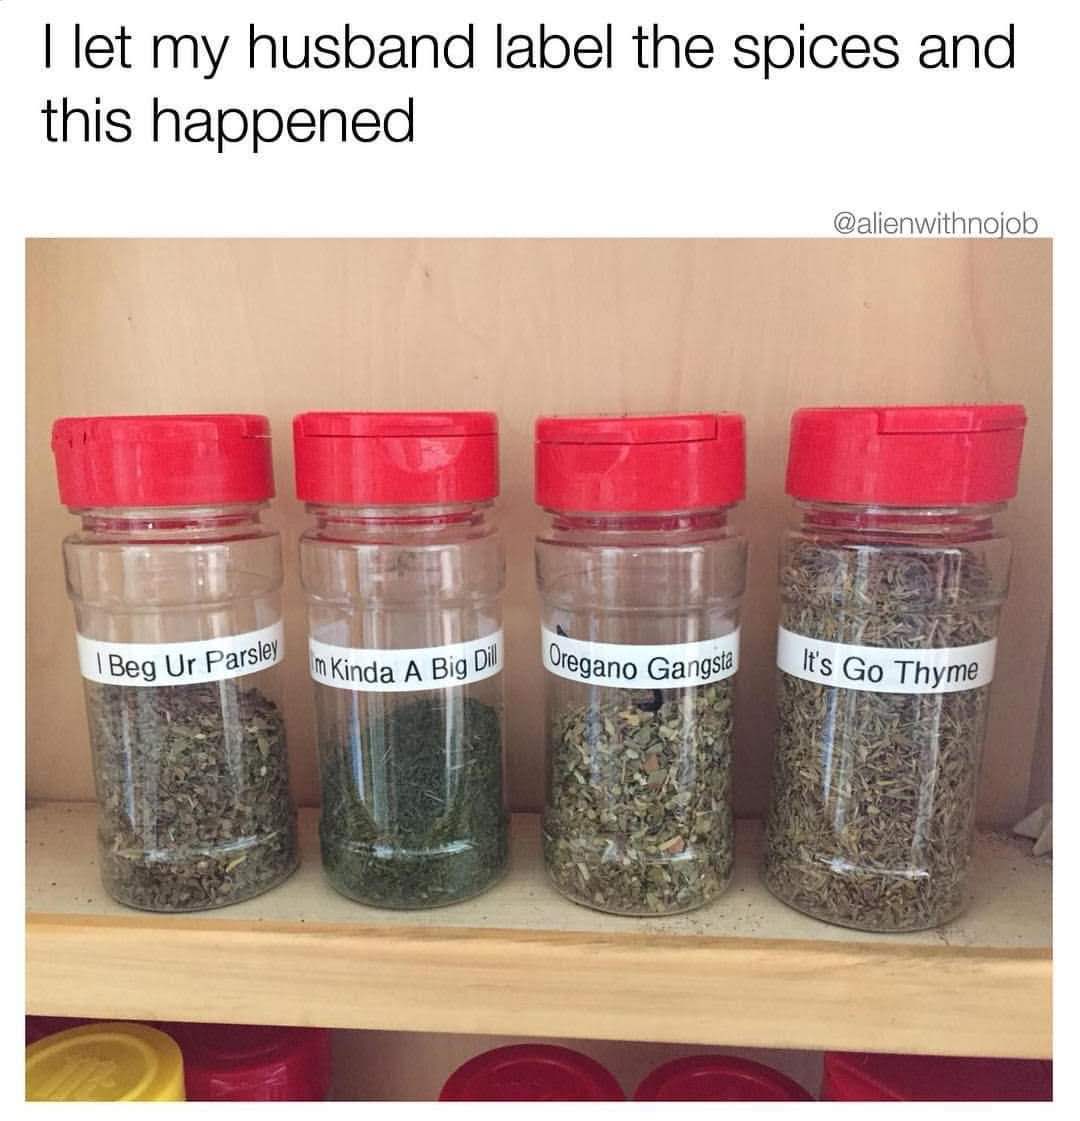 husband labels spices meme - I let my husband label the spices and this happened I Beg Ur Parsley m Kinda A Big Dil Oregano Gangsta It's Go Thyme